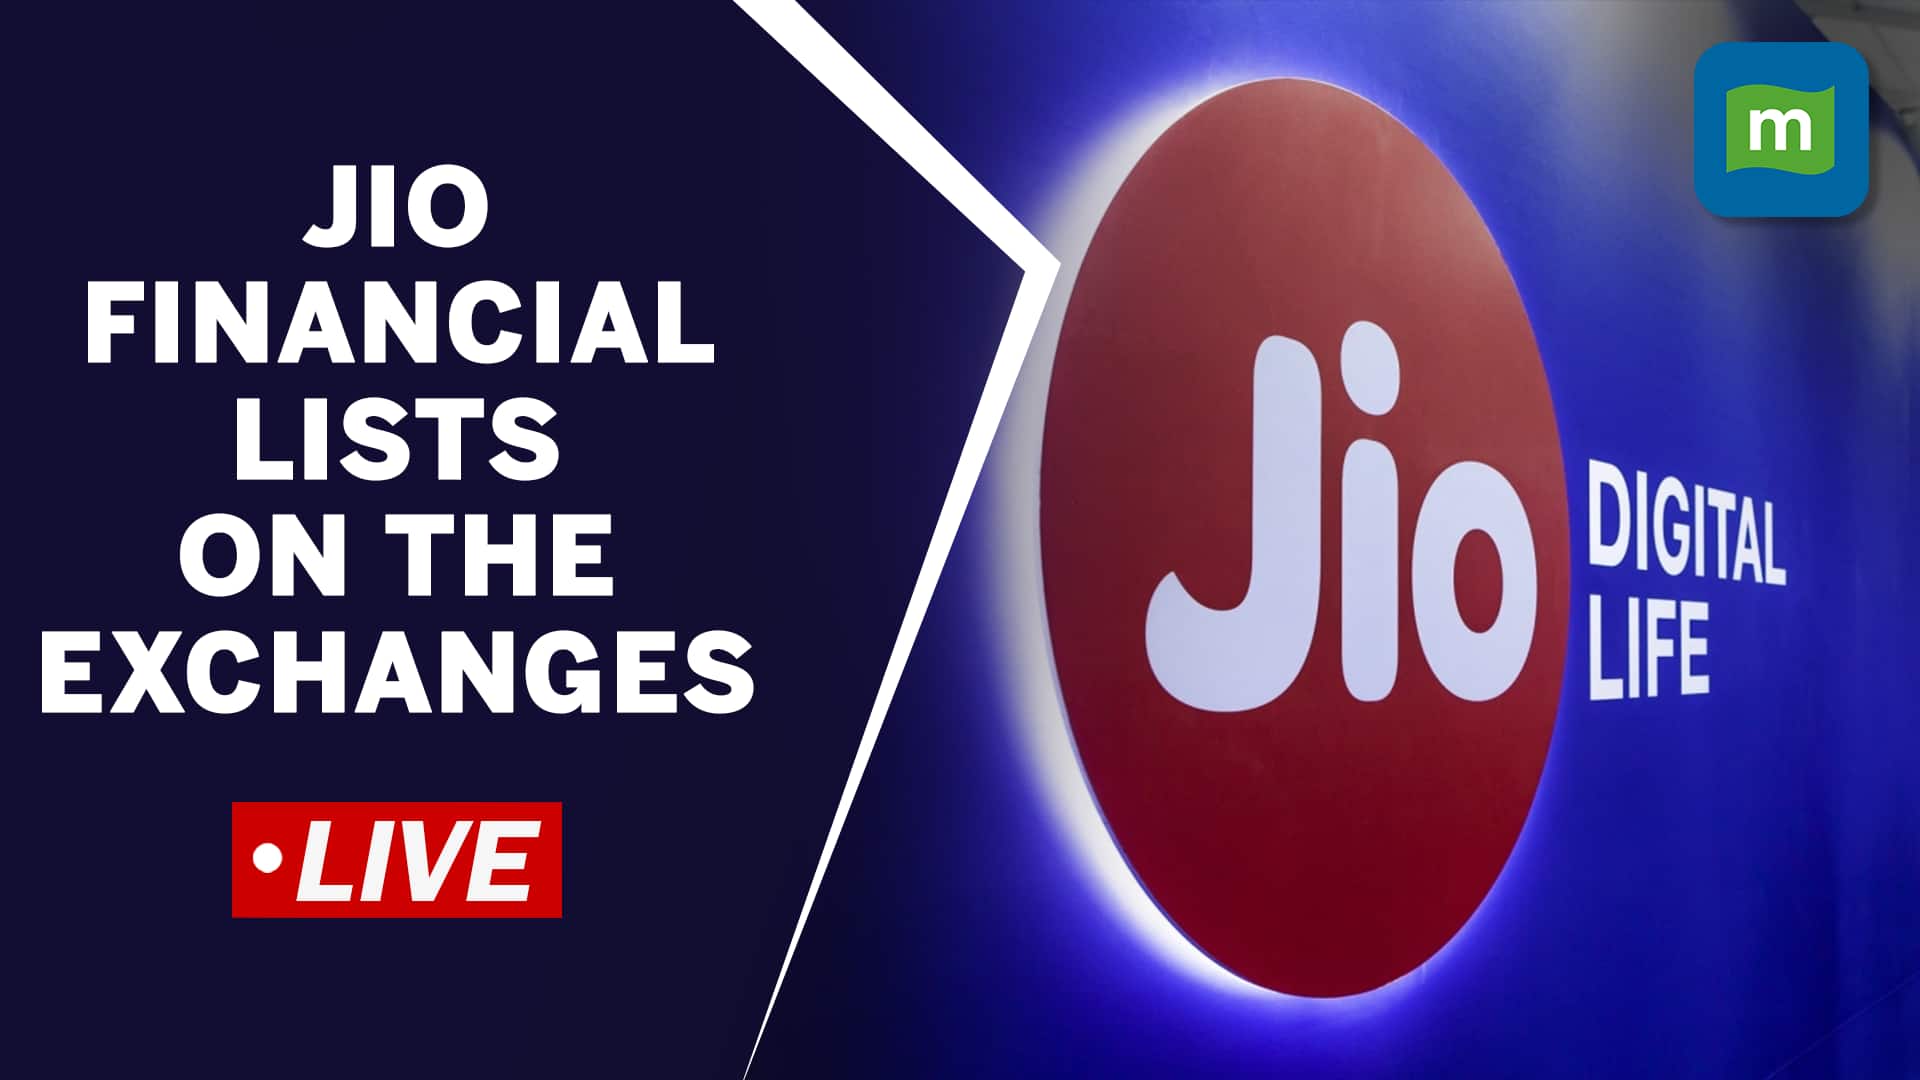 Live Jio Financial Services lists on the Exchanges, whats next? First listing from RIL stable in years